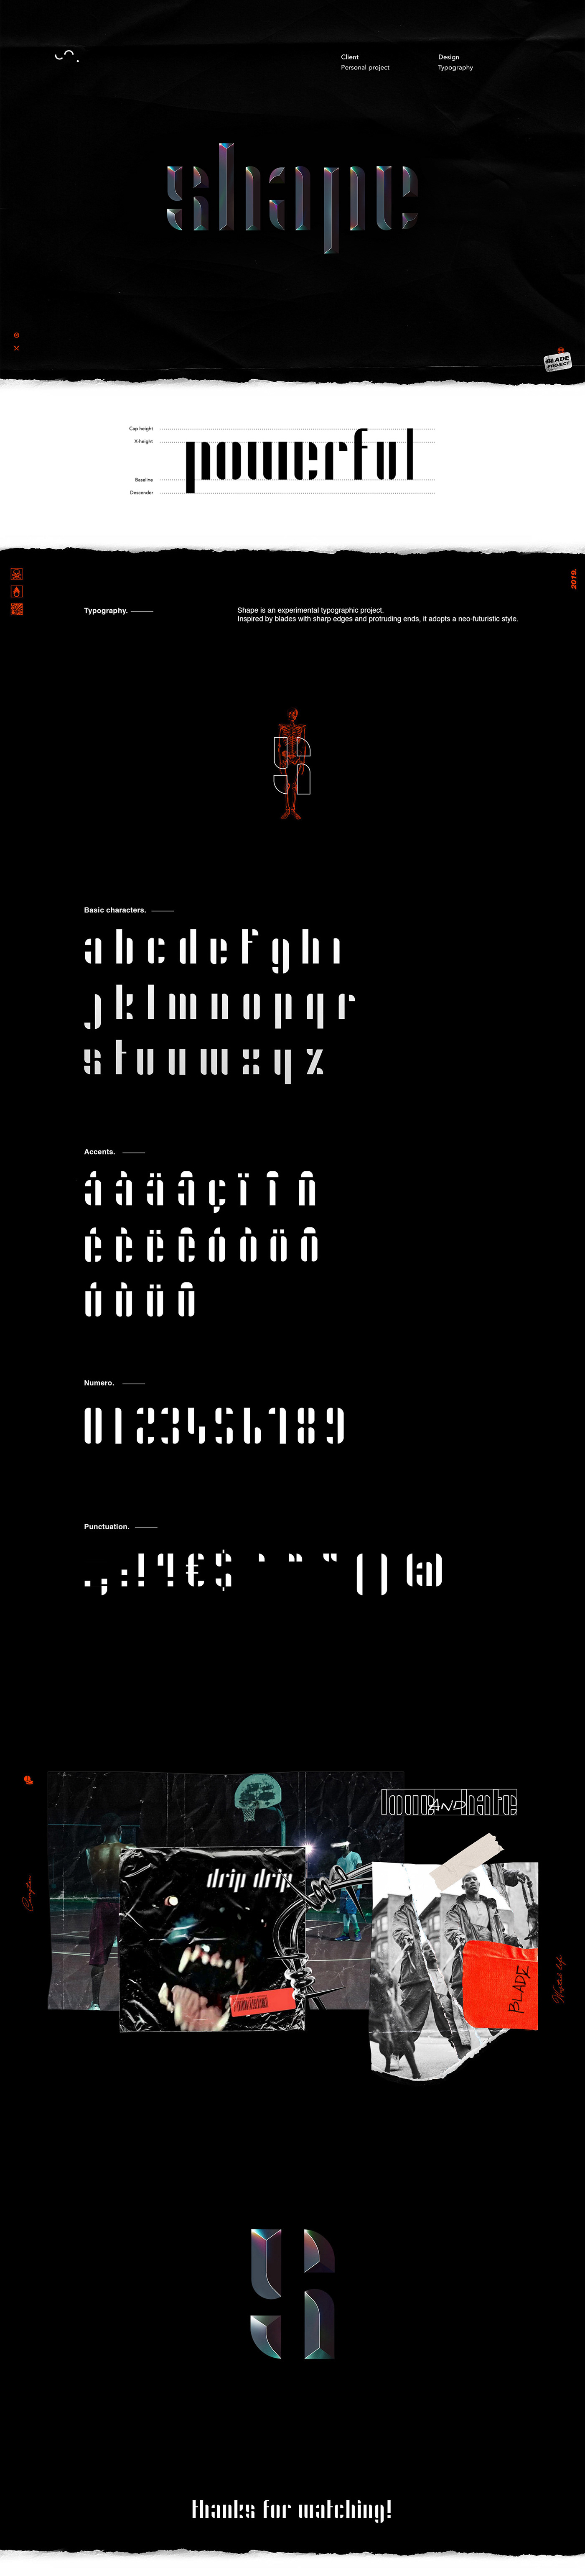 Free Shape Neo Futurism Typeface is an experimental and innovative typeface, inspired by blades.